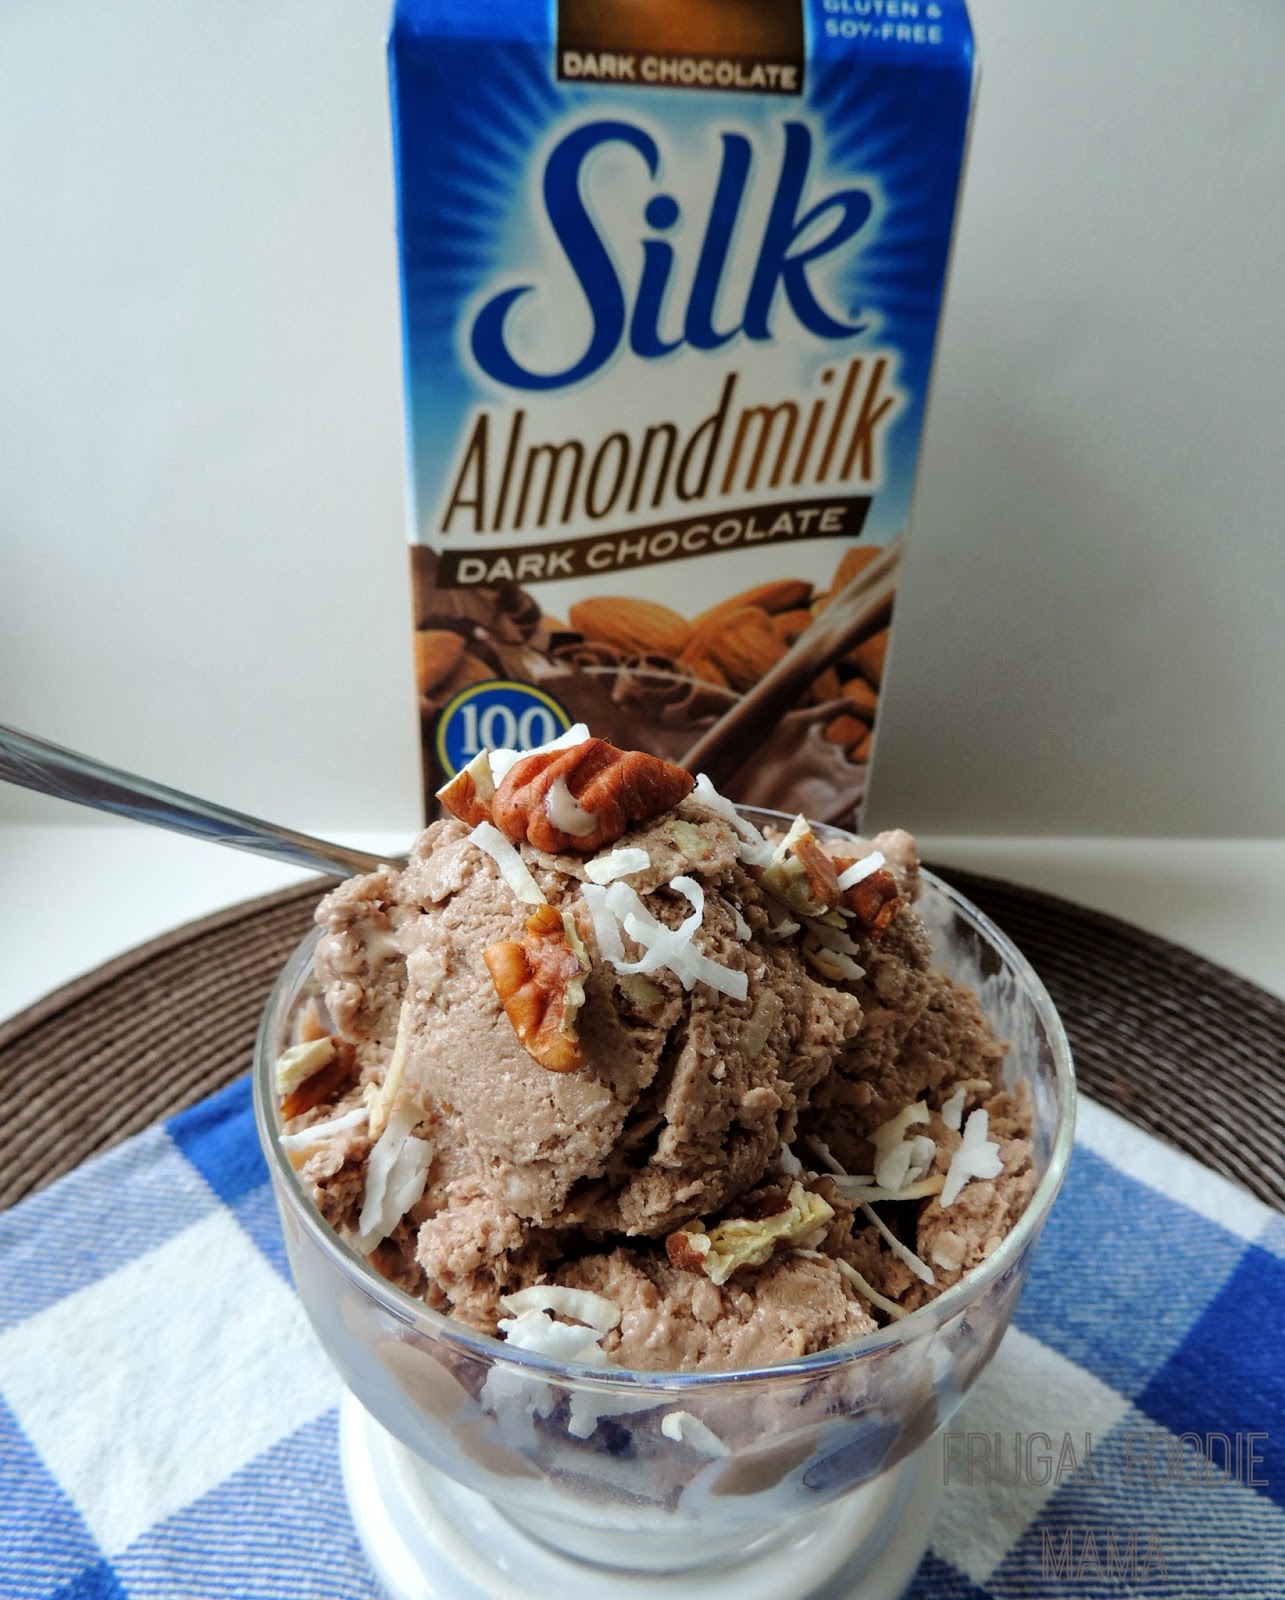 Made with dark chocolate almond milk, this no-churn Skinny German Chocolate Ice Cream is creamy & delicious and easy on the waistline.